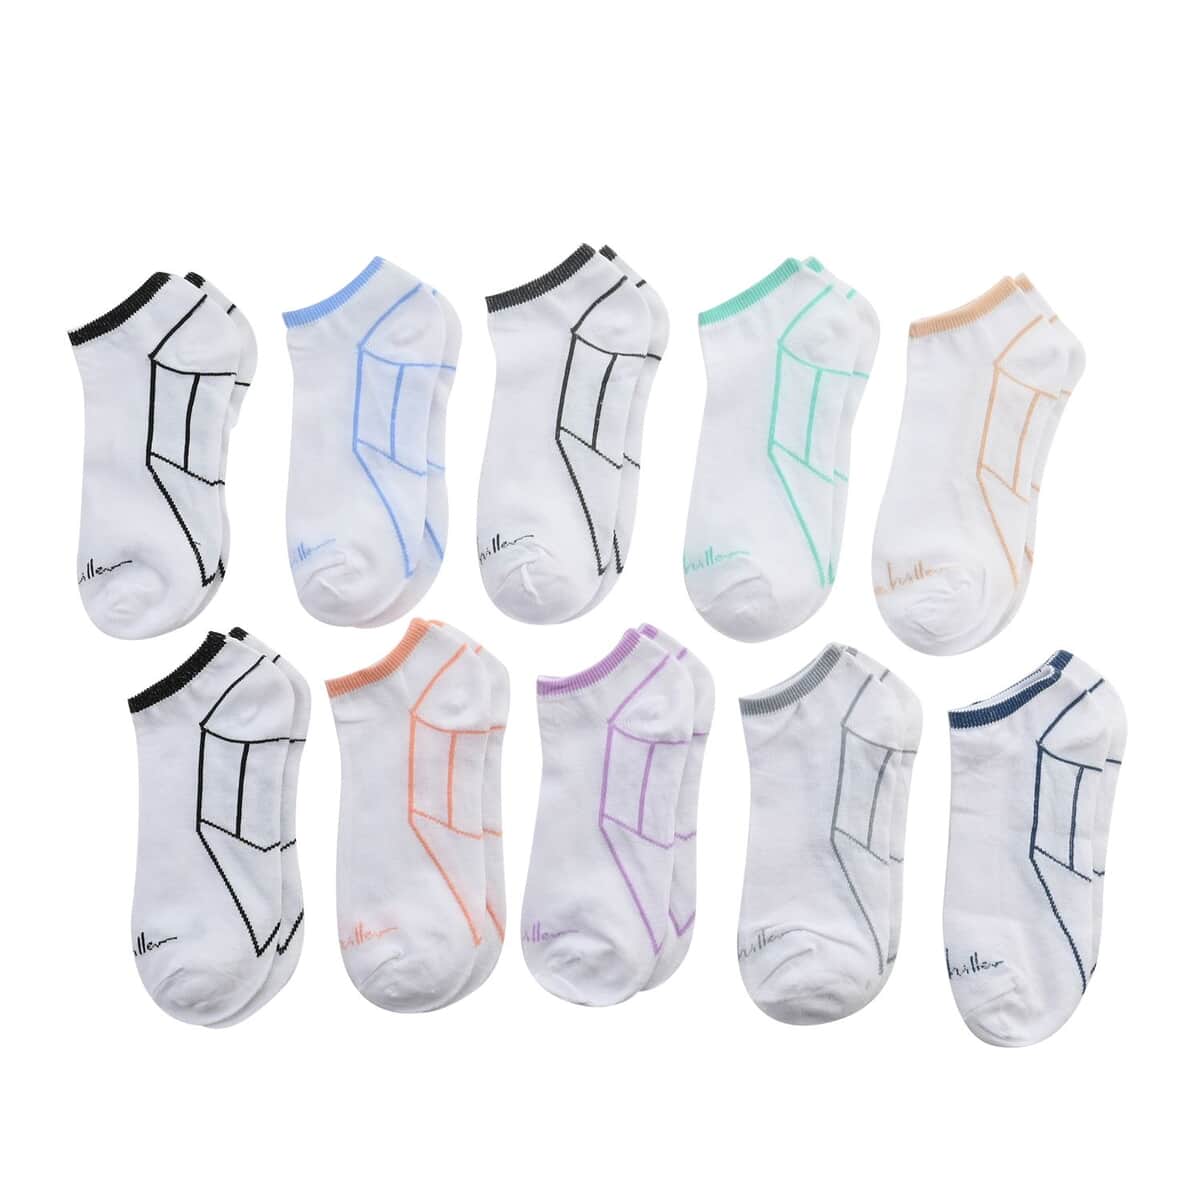 TLV Nicole Miller 10 Pairs No Show Socks (Sizes 4-10) - White/Multi (Ships in 8-10 business days) image number 0